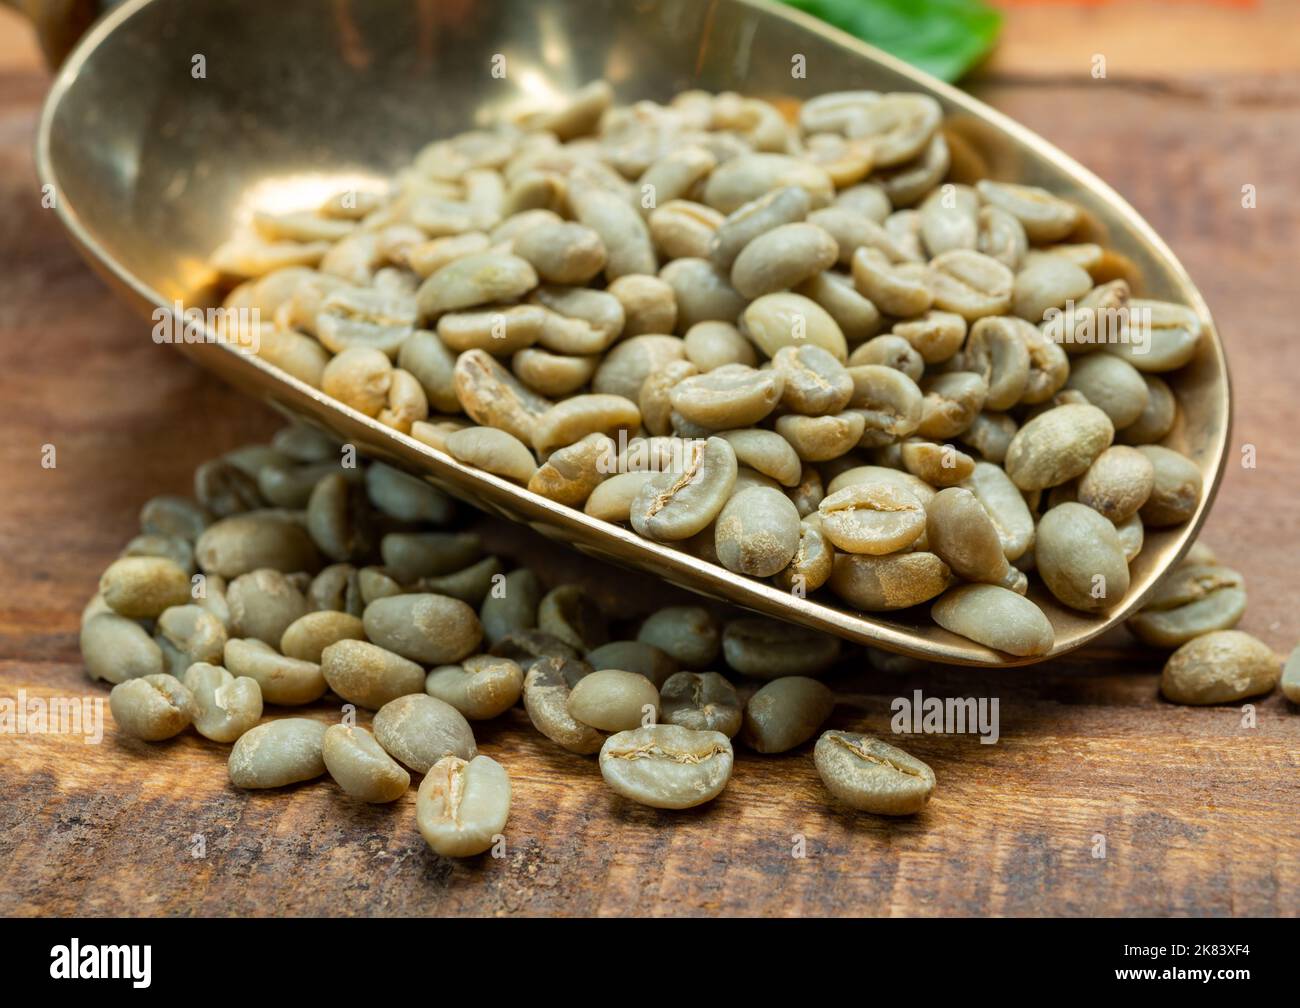 Green coffee beans from South America coffee producing region, from Colombia and Brazil with mountain ranges and climate ideal for coffee growing, clo Stock Photo